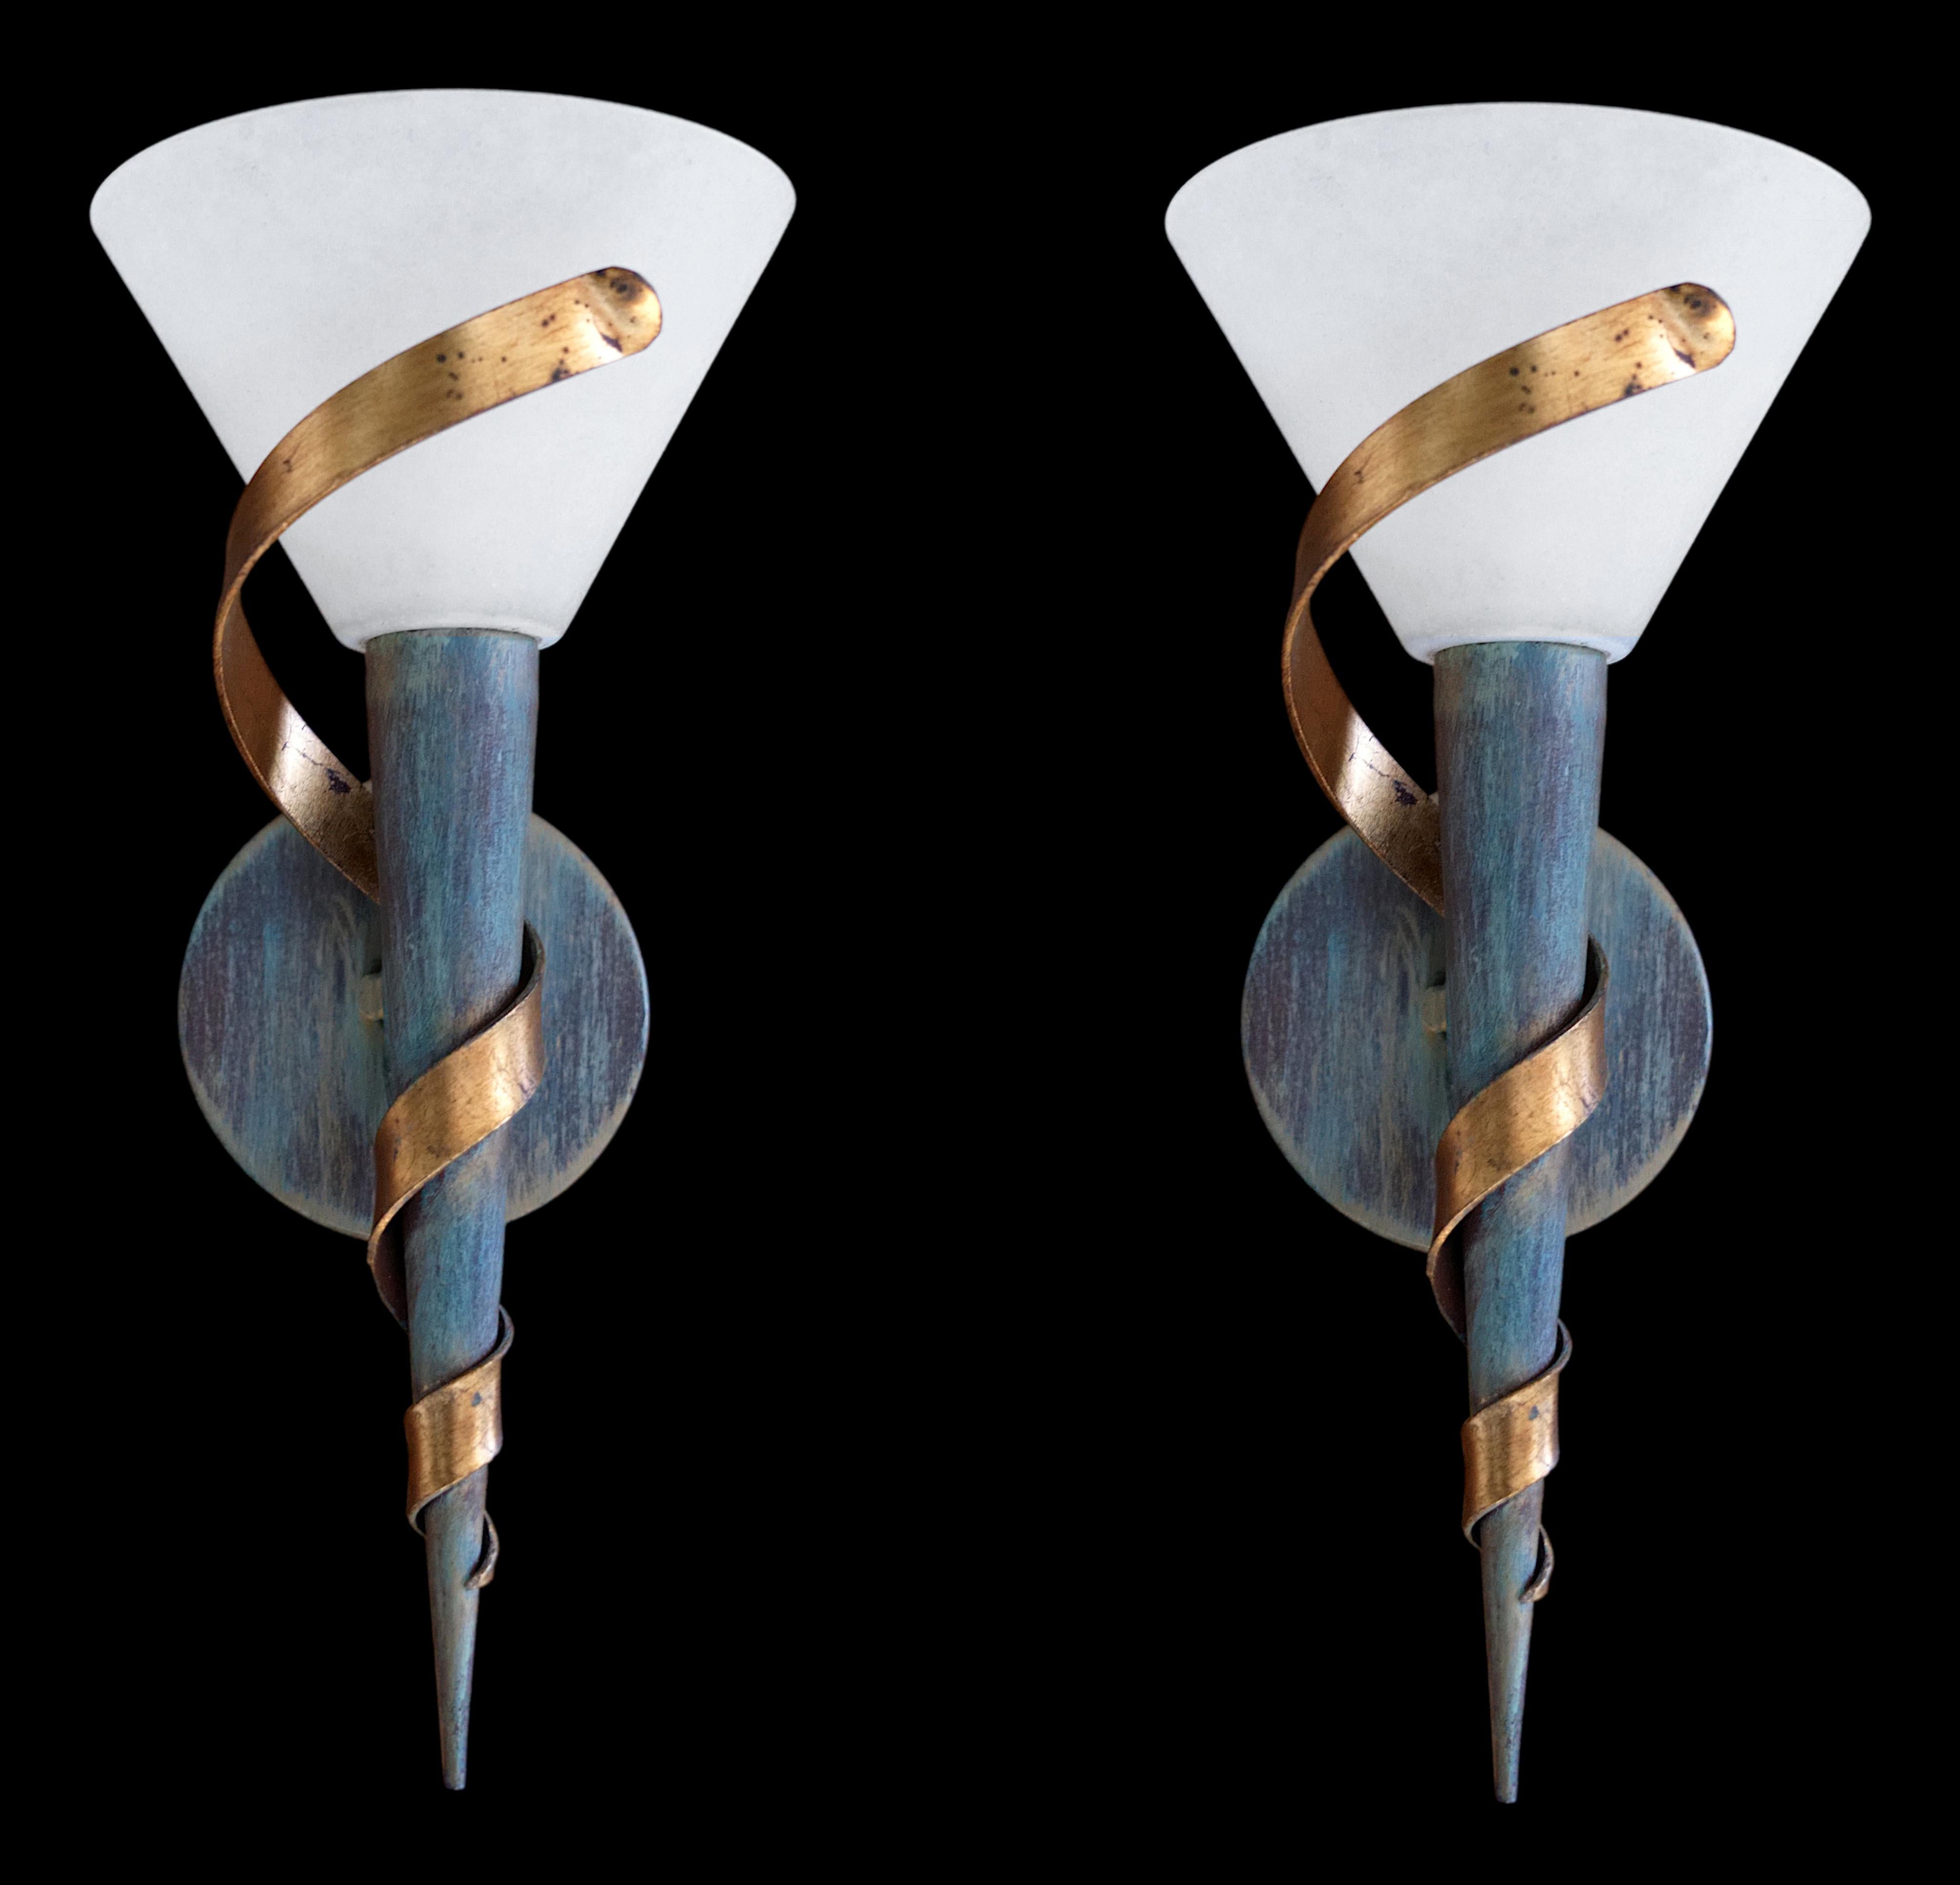 French mid-century pair of wall sconces, France, 1970s. Metal & glass. Height: 14.6